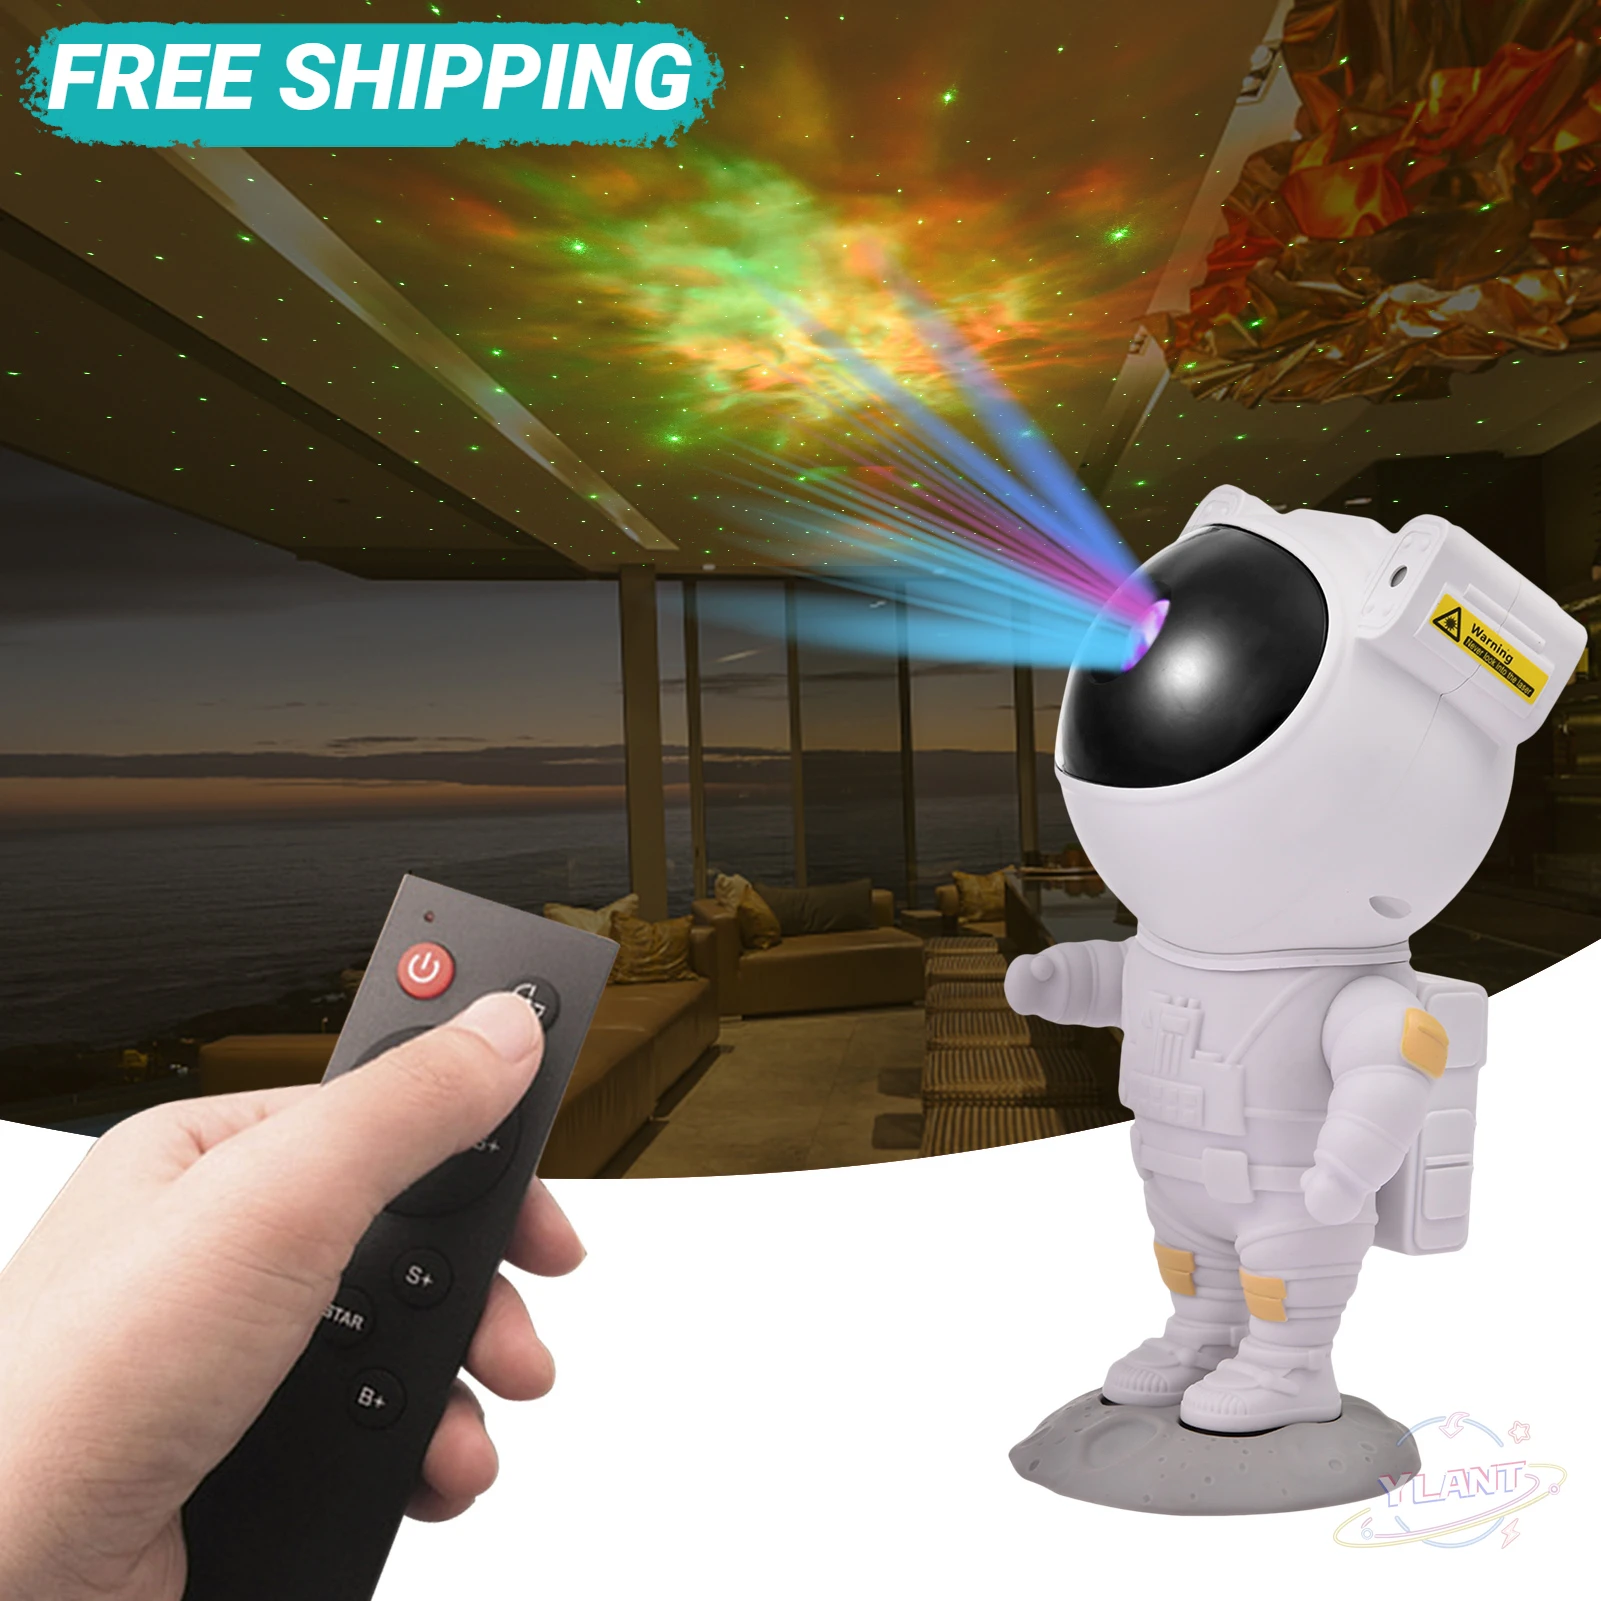 Starry Sky Astronaut Night Light Galaxy Star Projector Lamp With Remote Control And Timer Mood Lighting Home Room Decor Gifts